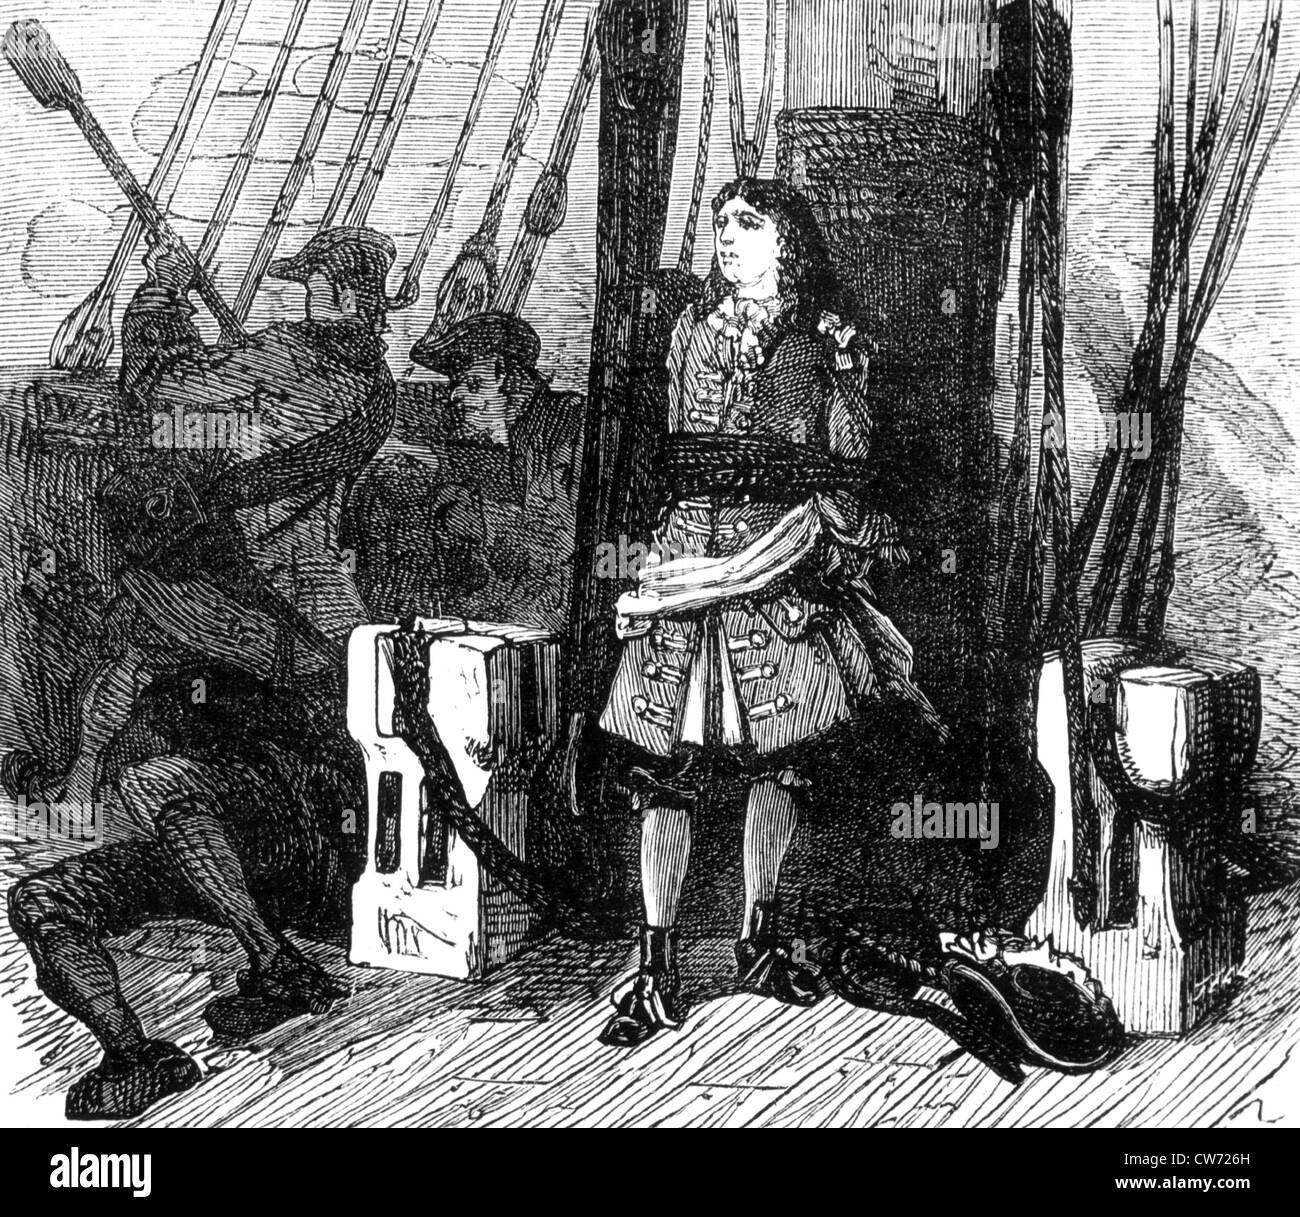 Jean Bart's son tied to the mast during battles, so as to become hardened Stock Photo